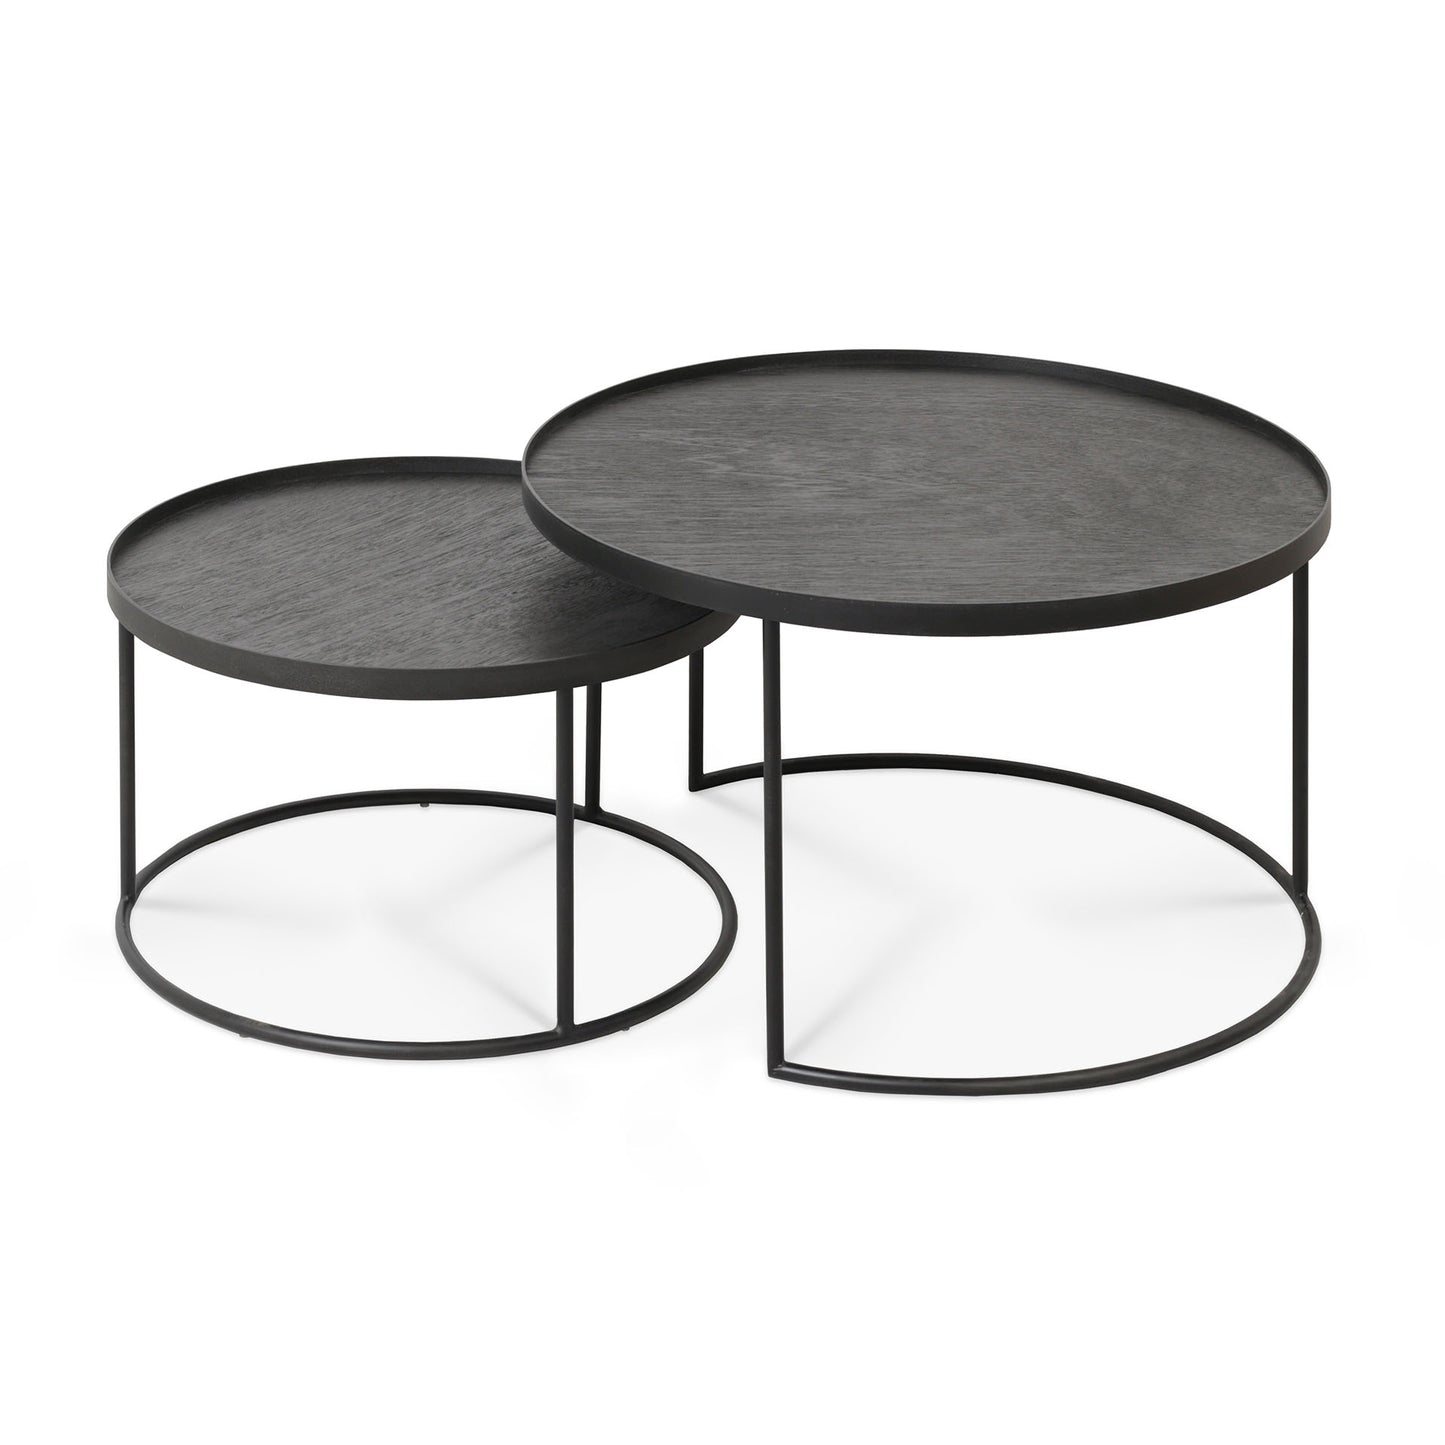 Round tray coffee table set (trays not included)